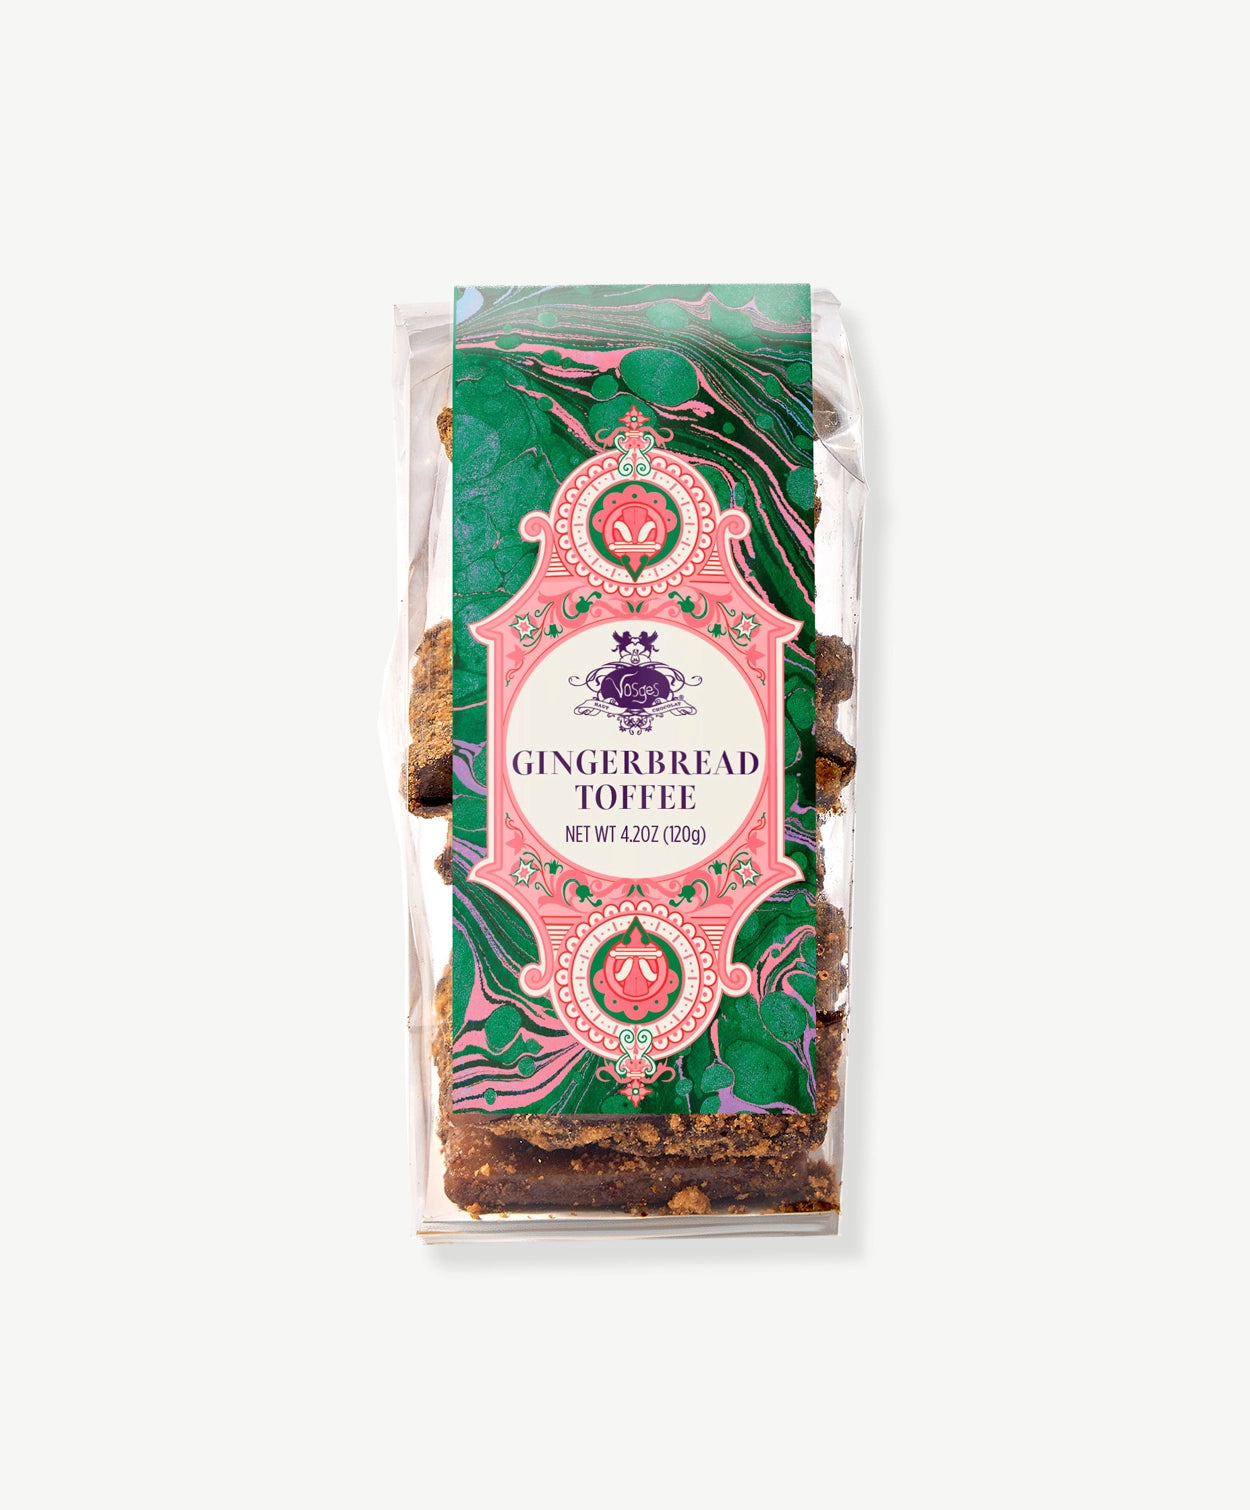 Vosges Gingerbread Speculoos coated toffee in a clear plastic bag bearing a pink and green label stands upright on a white background.